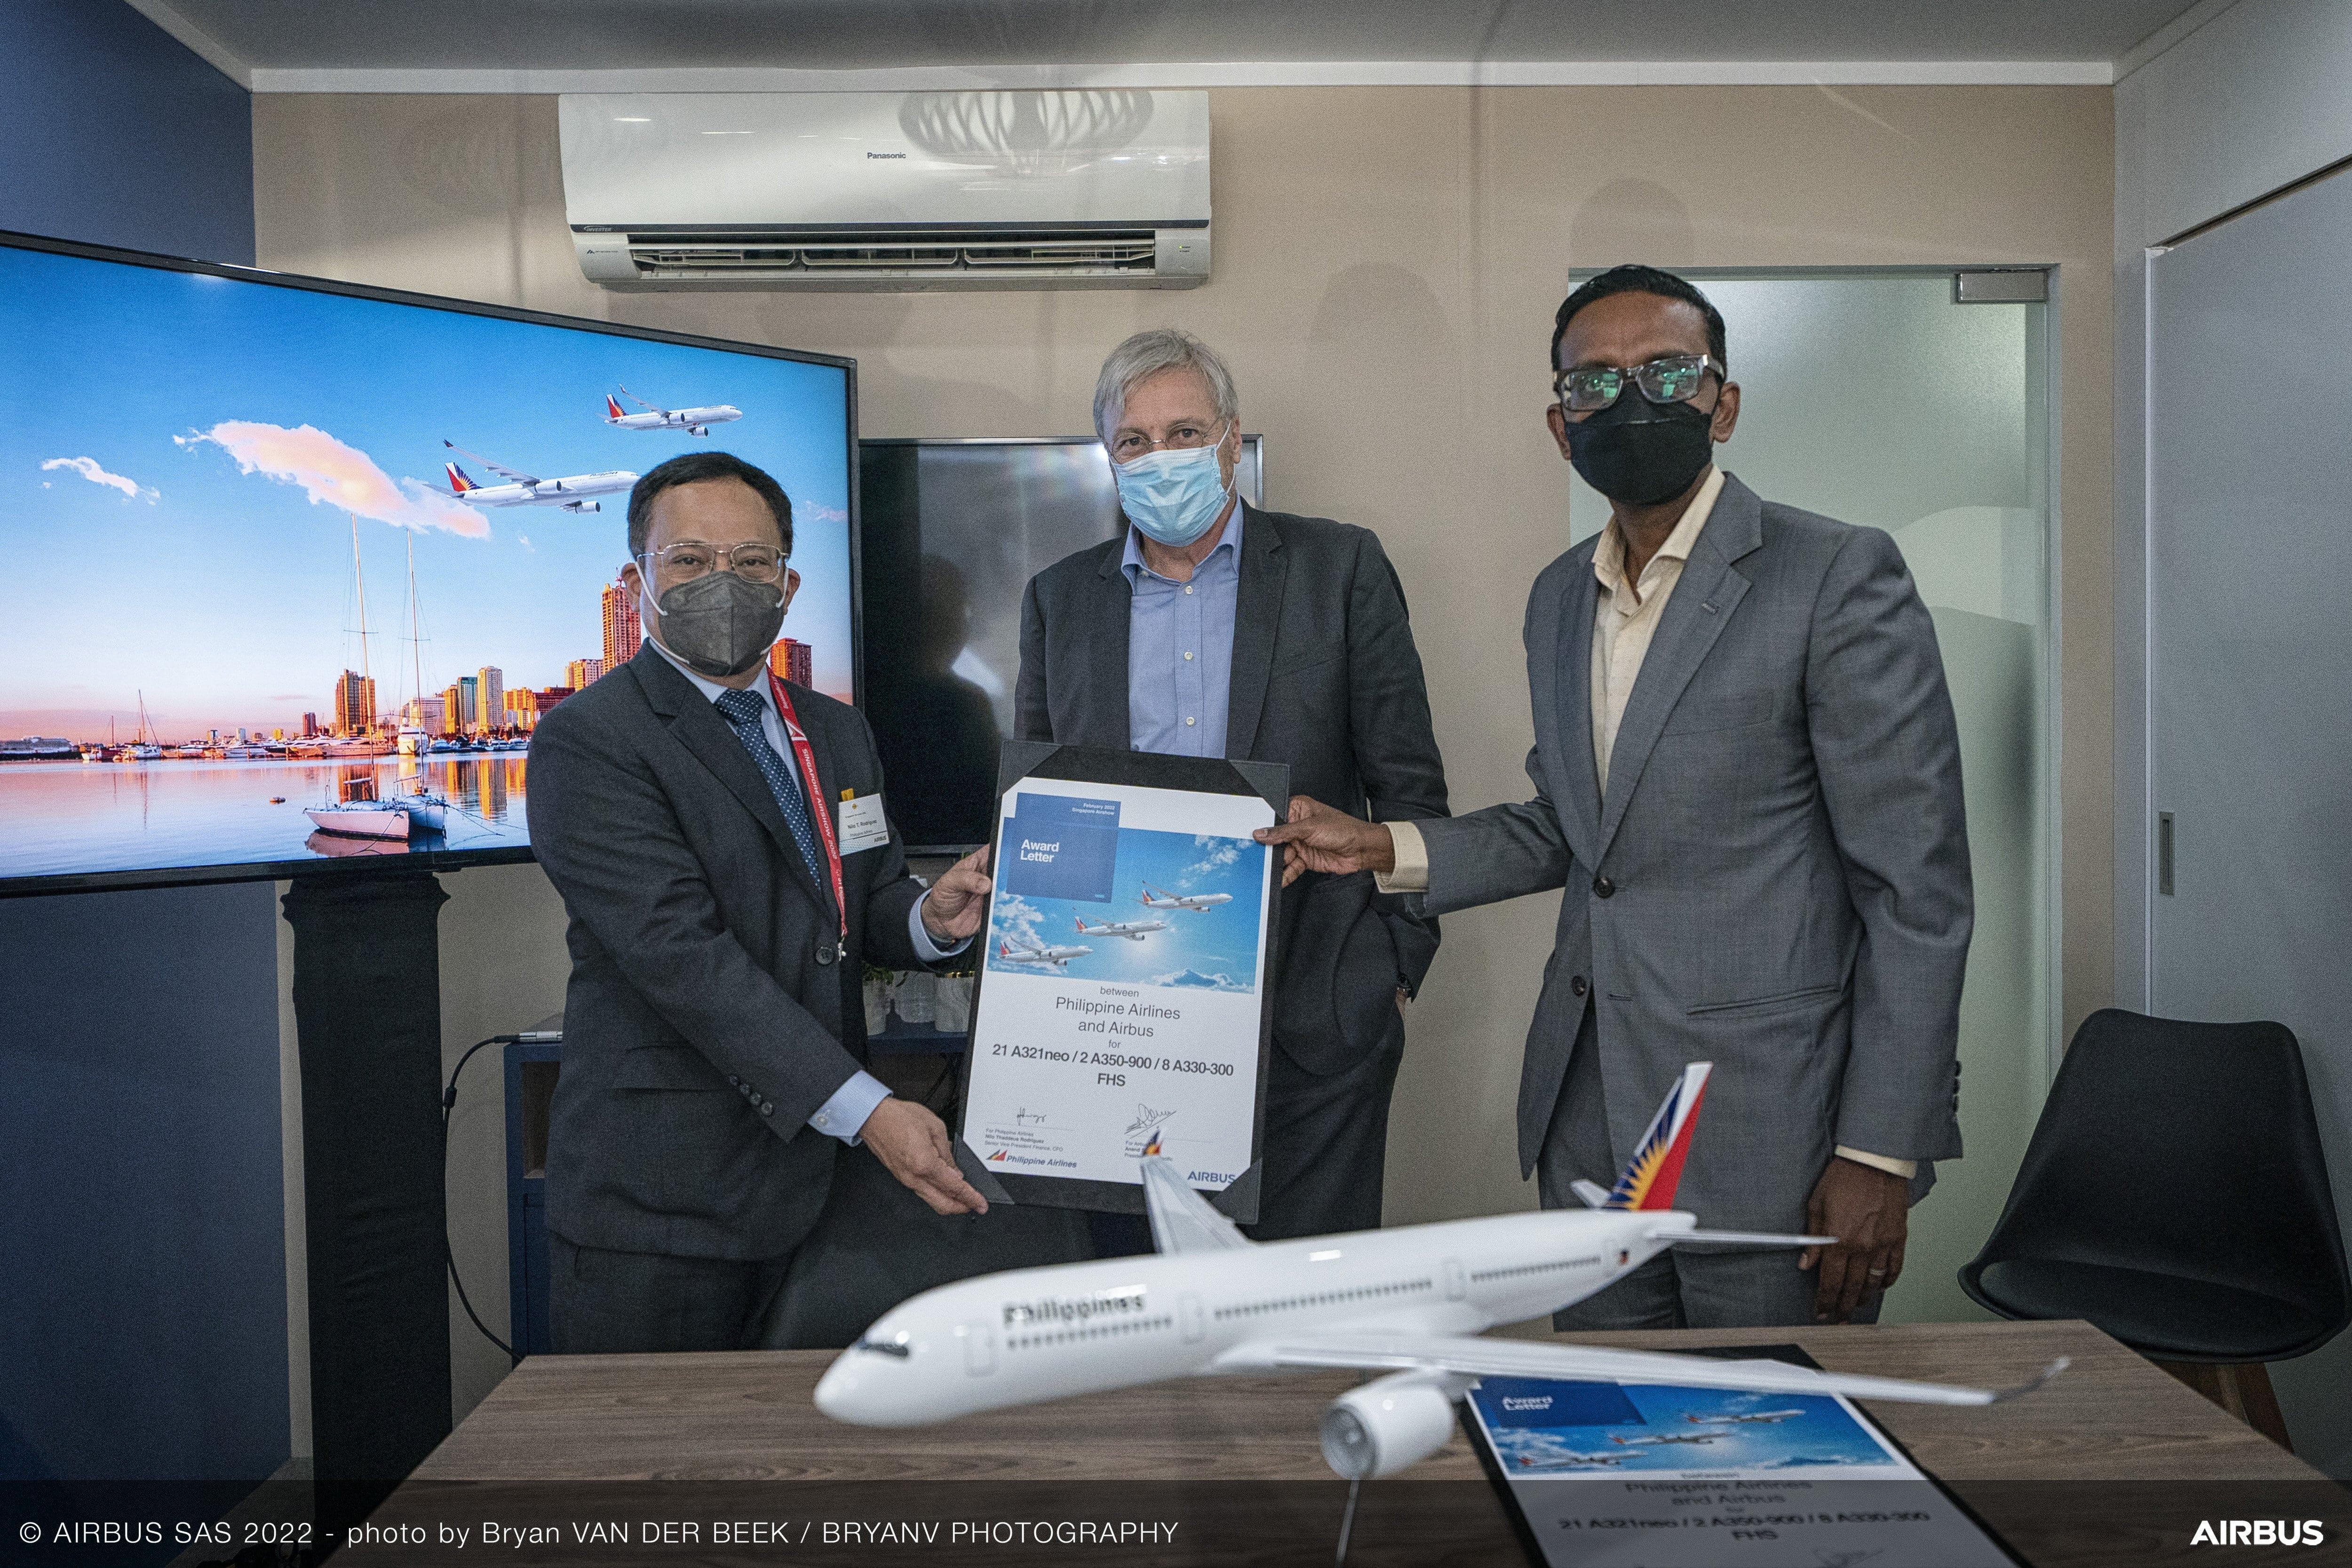 Airbus to Provide Cabin Upgrades and New Material Services to Philippine Airlines